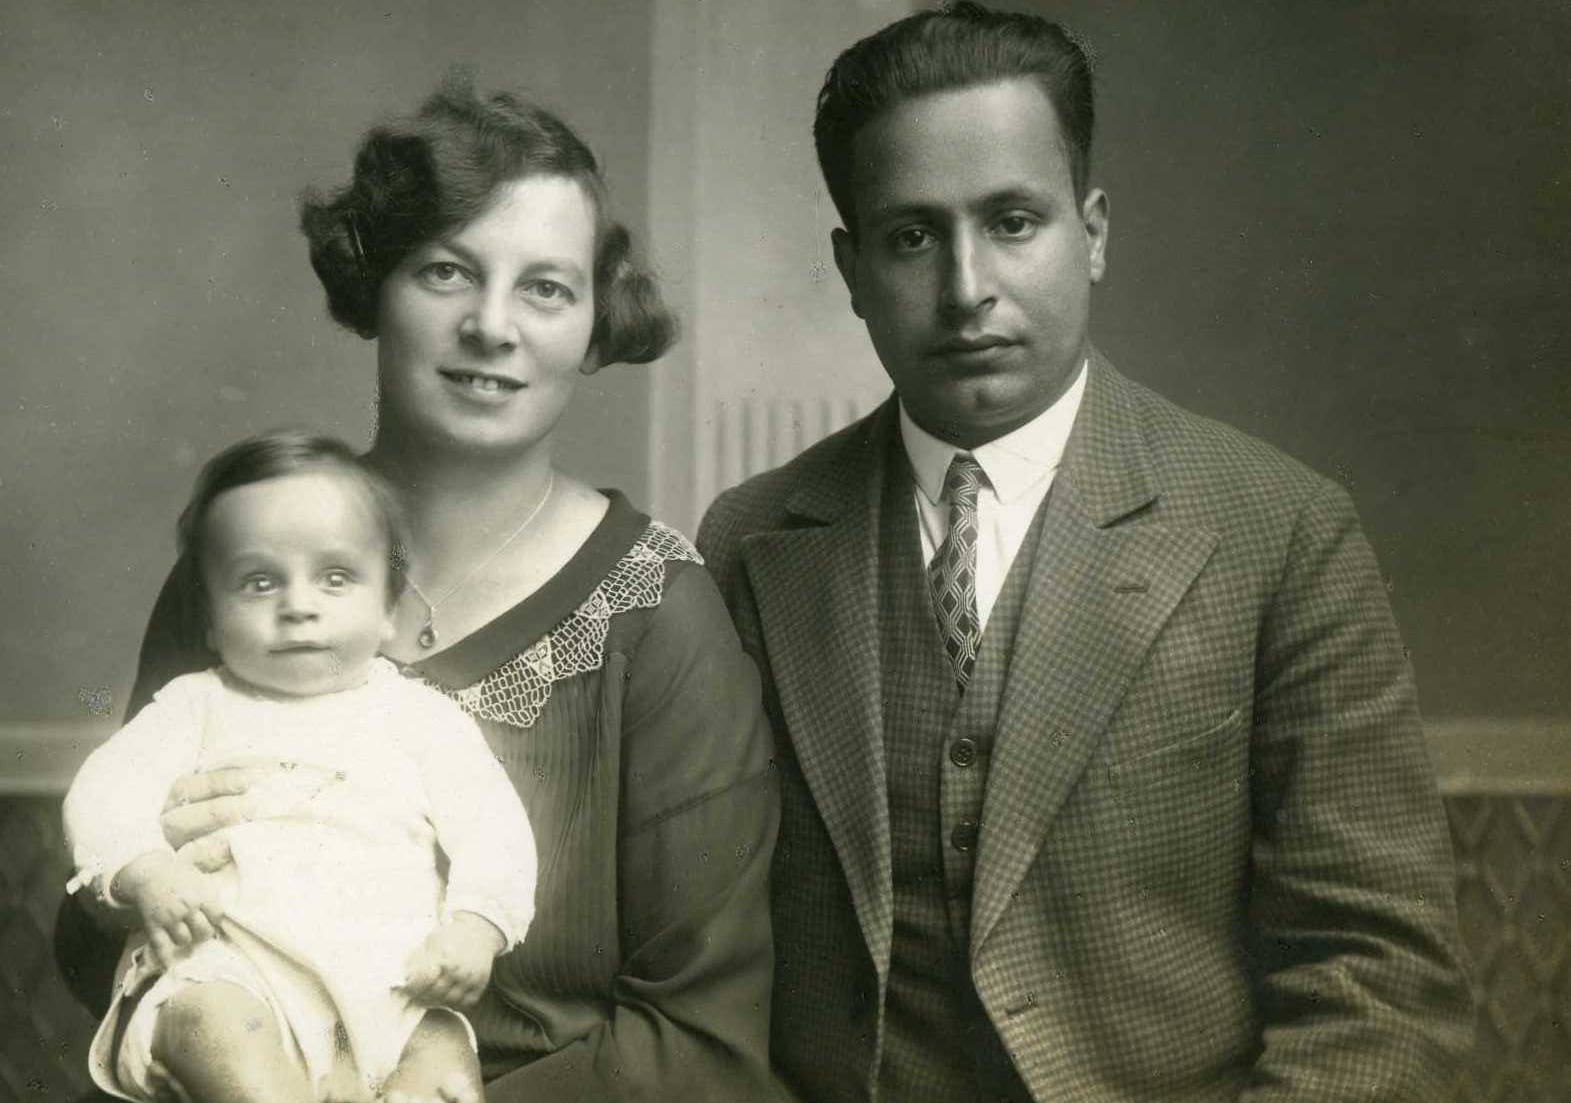  Nicholas Winton, 'Britain's Schindler,' Is Remembered By Those He Saved From The Nazis: Parallels: NPR 